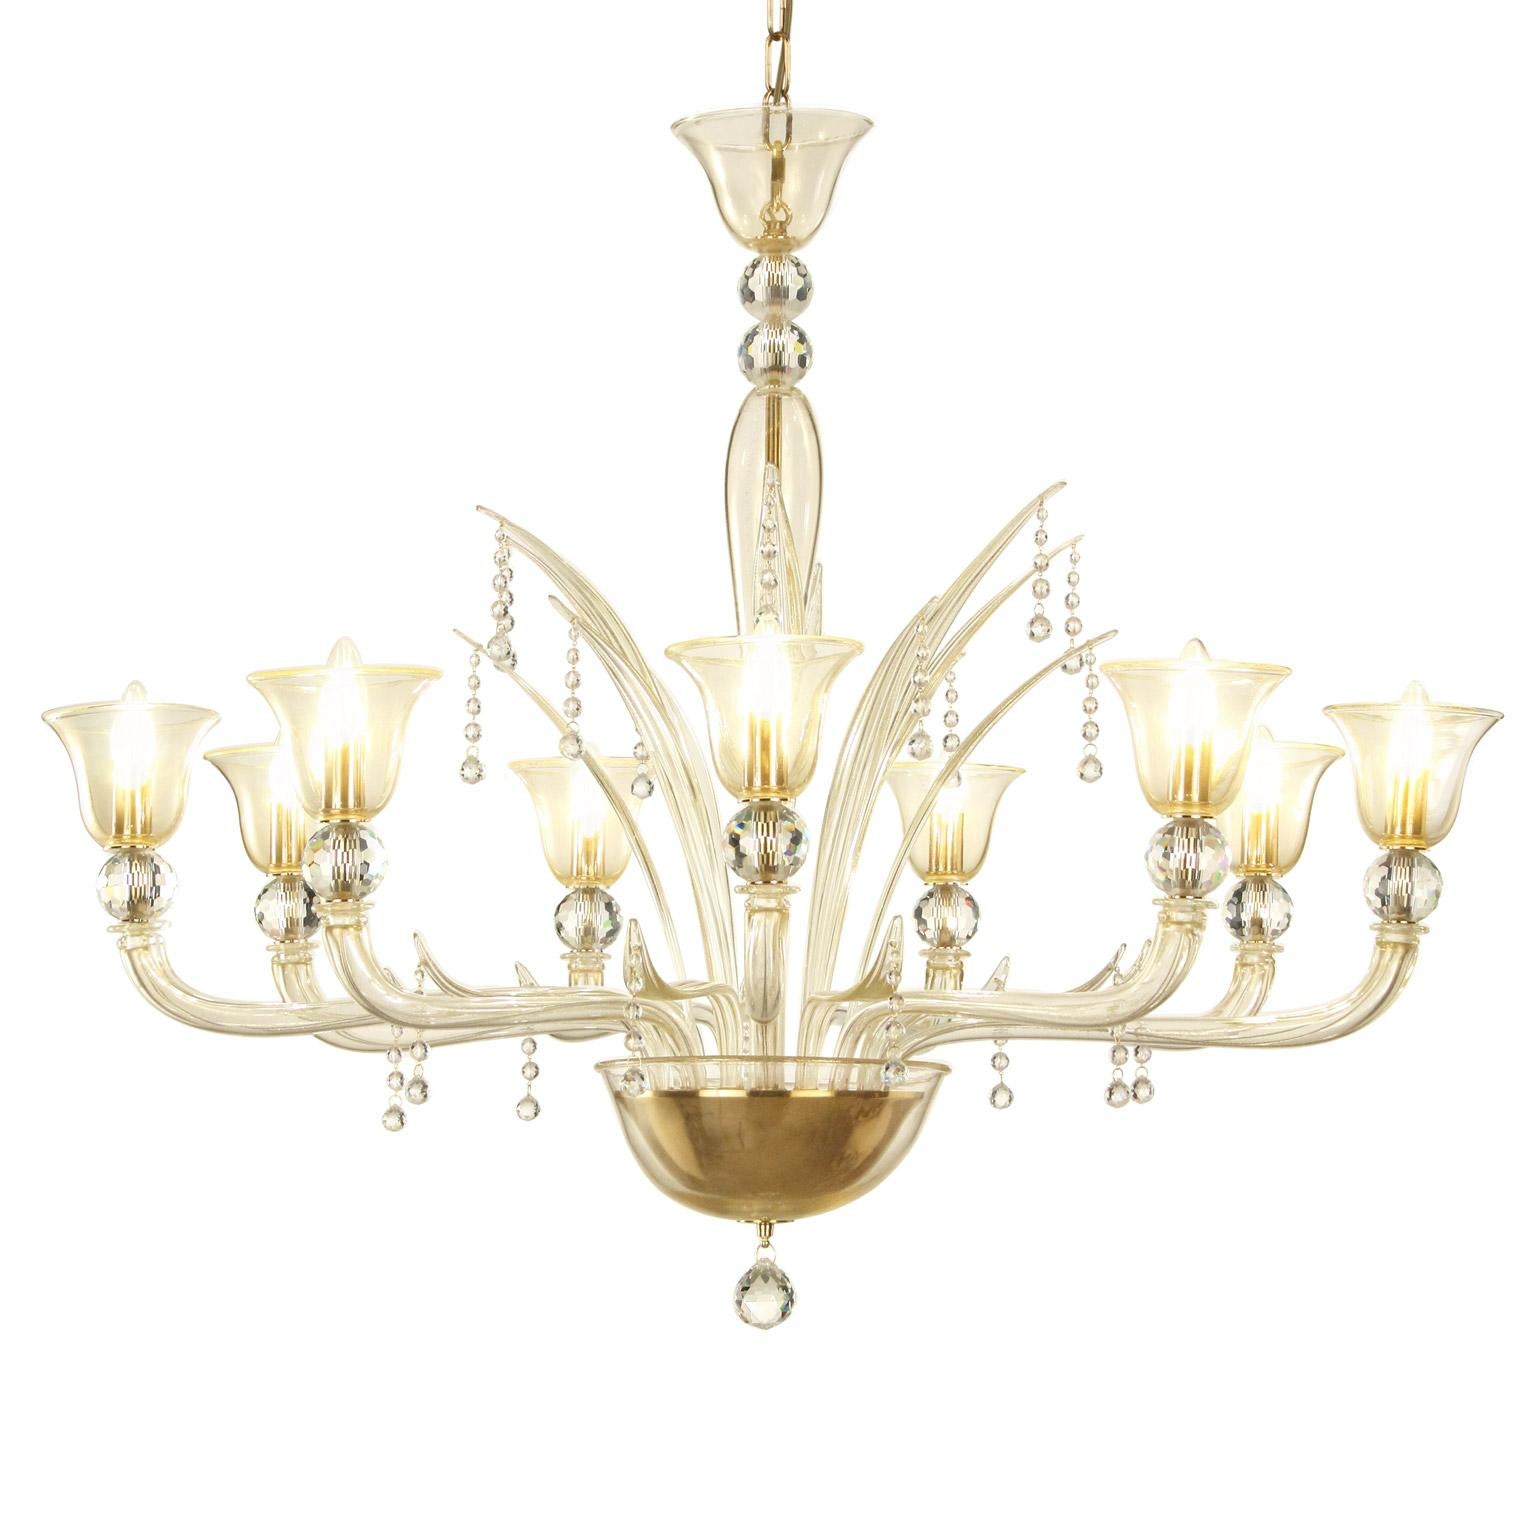 Italian Chandelier 9 arms Gold Color with precious Crystals details Tresor by Multiforme For Sale